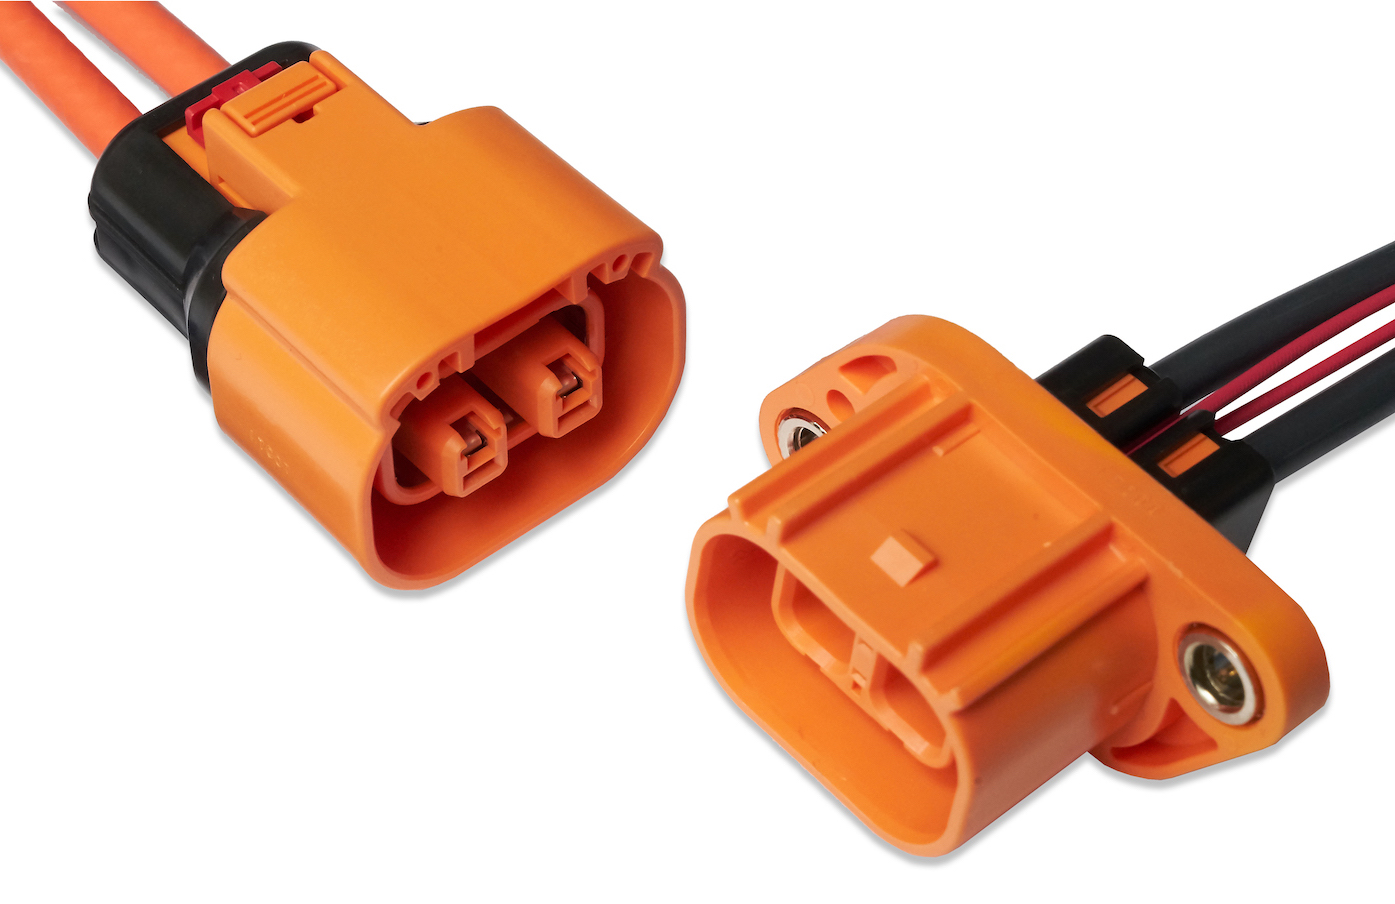 Sealed Wire-to-Wire Automotive Connectors from Hirose